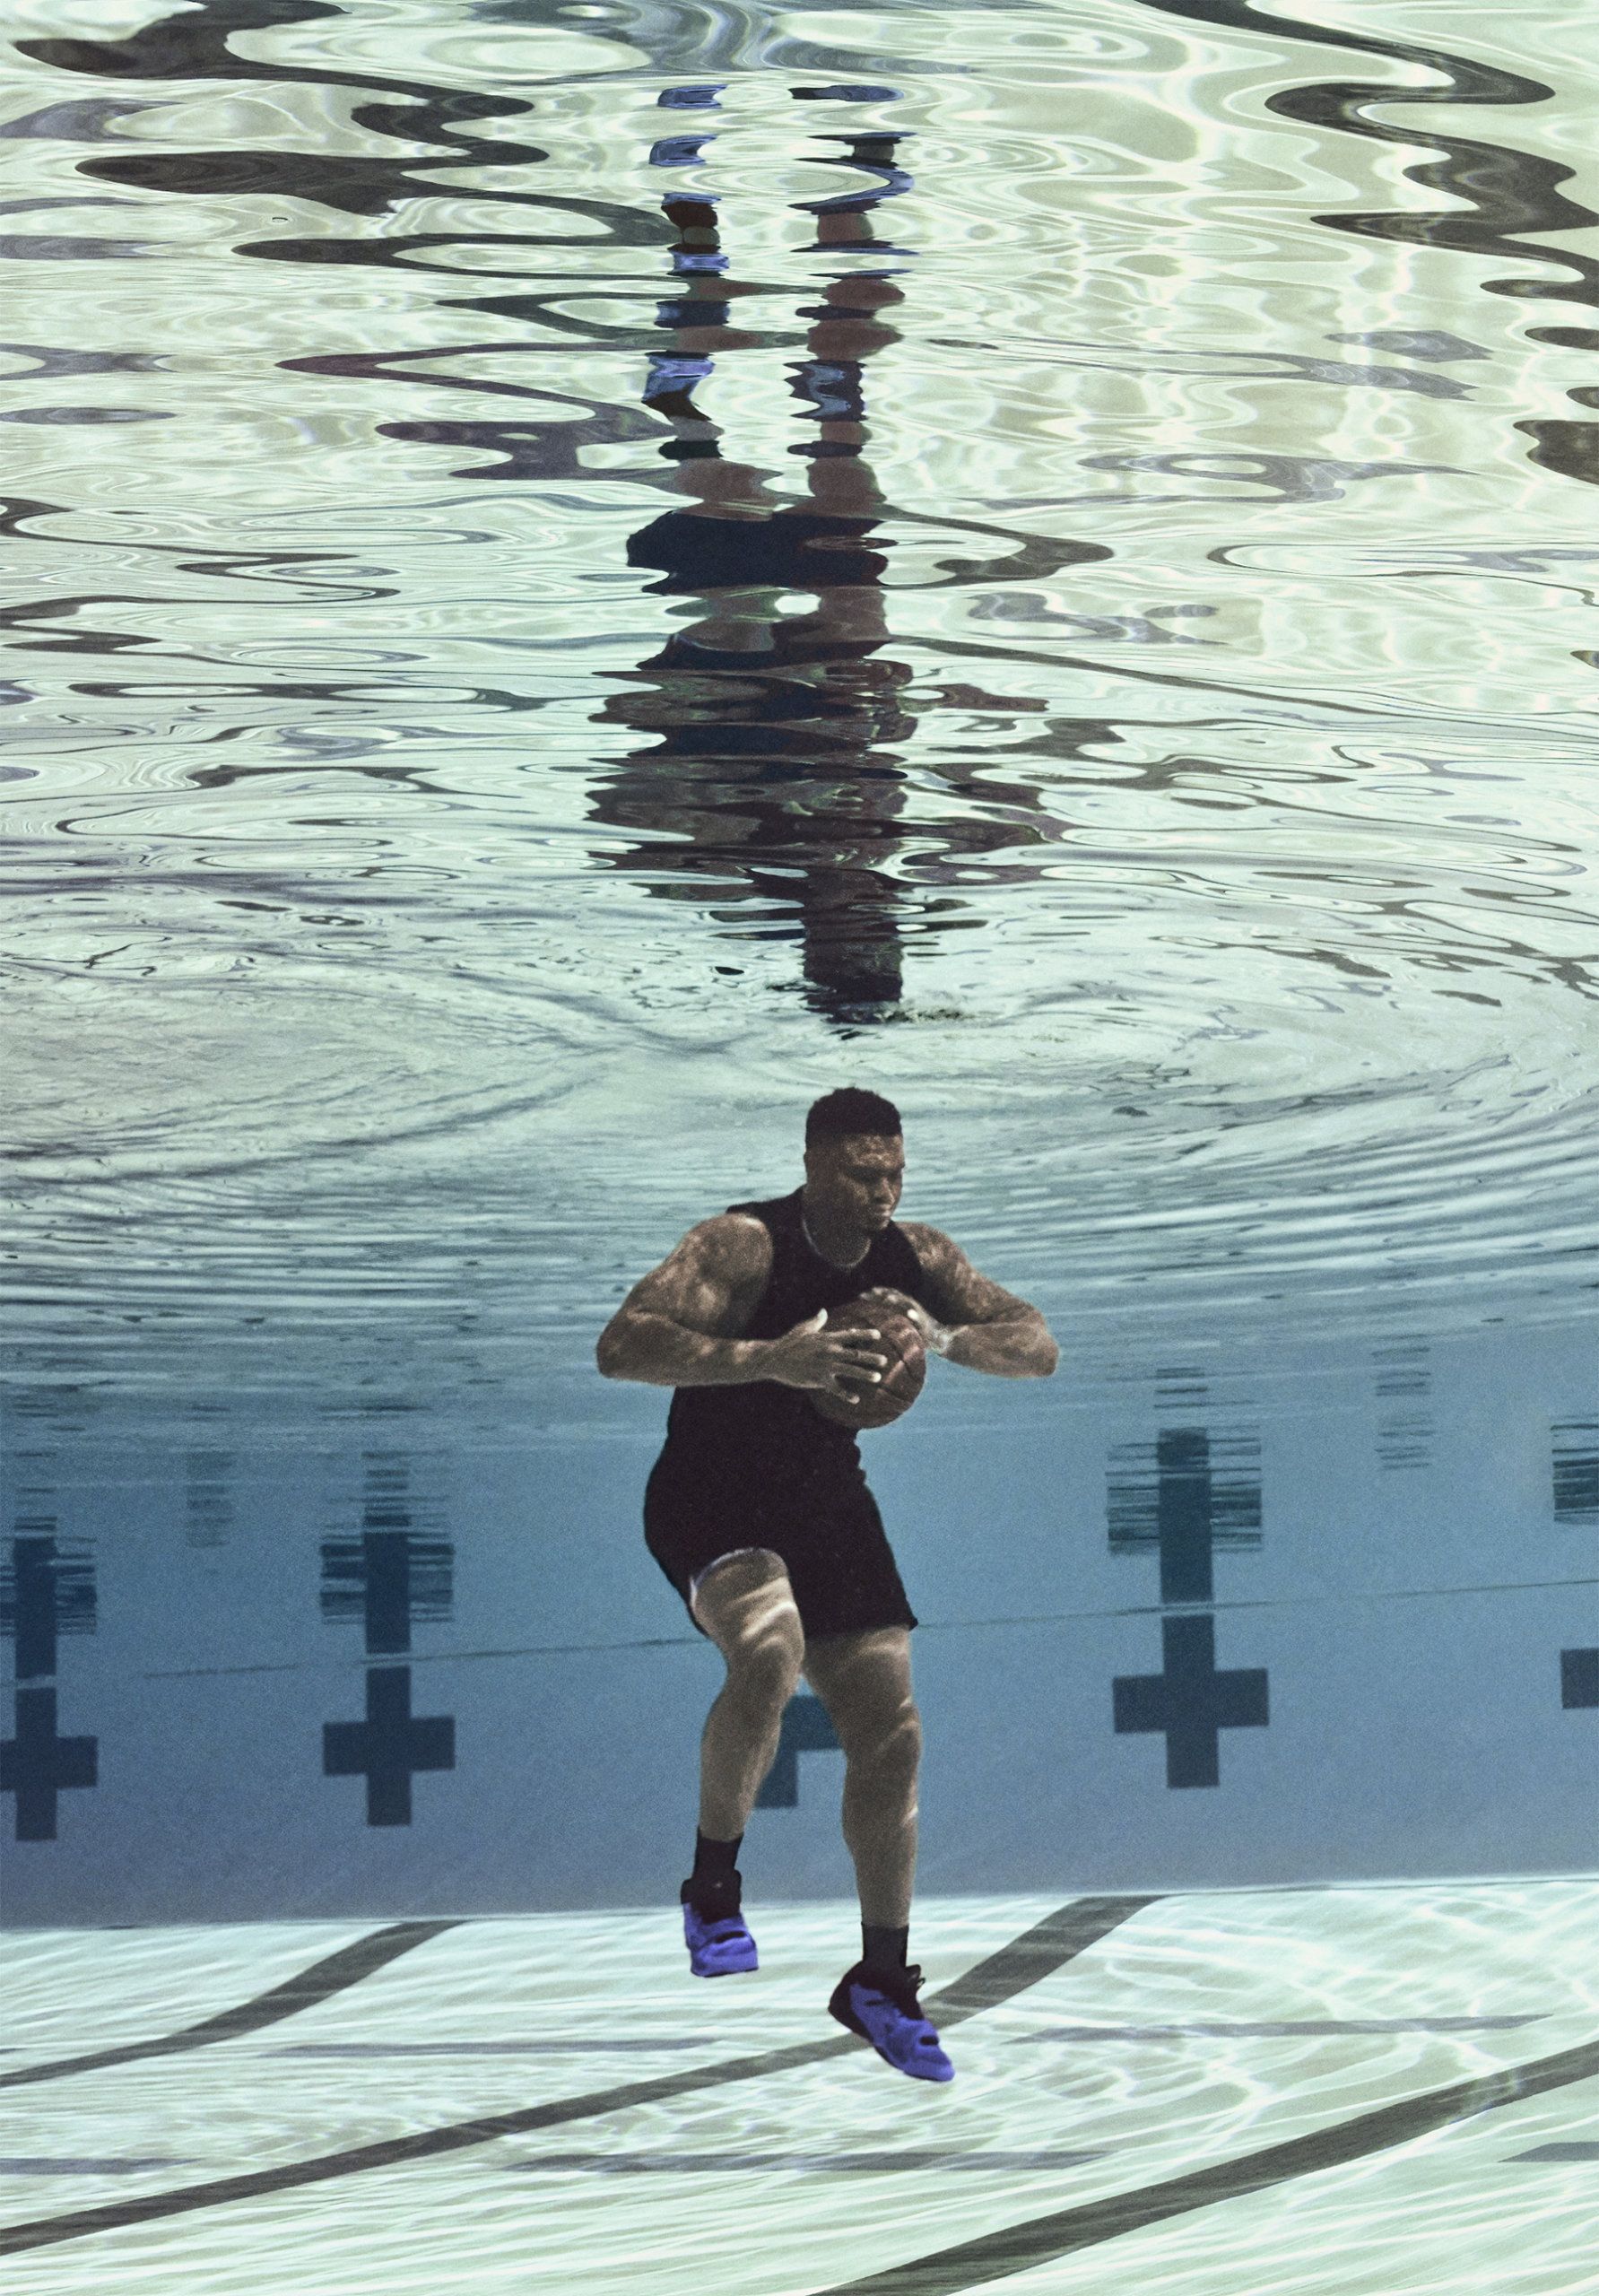 Zion Williamson underwater in swimming pool. There is a mirror like reflection on surface of water with ripples